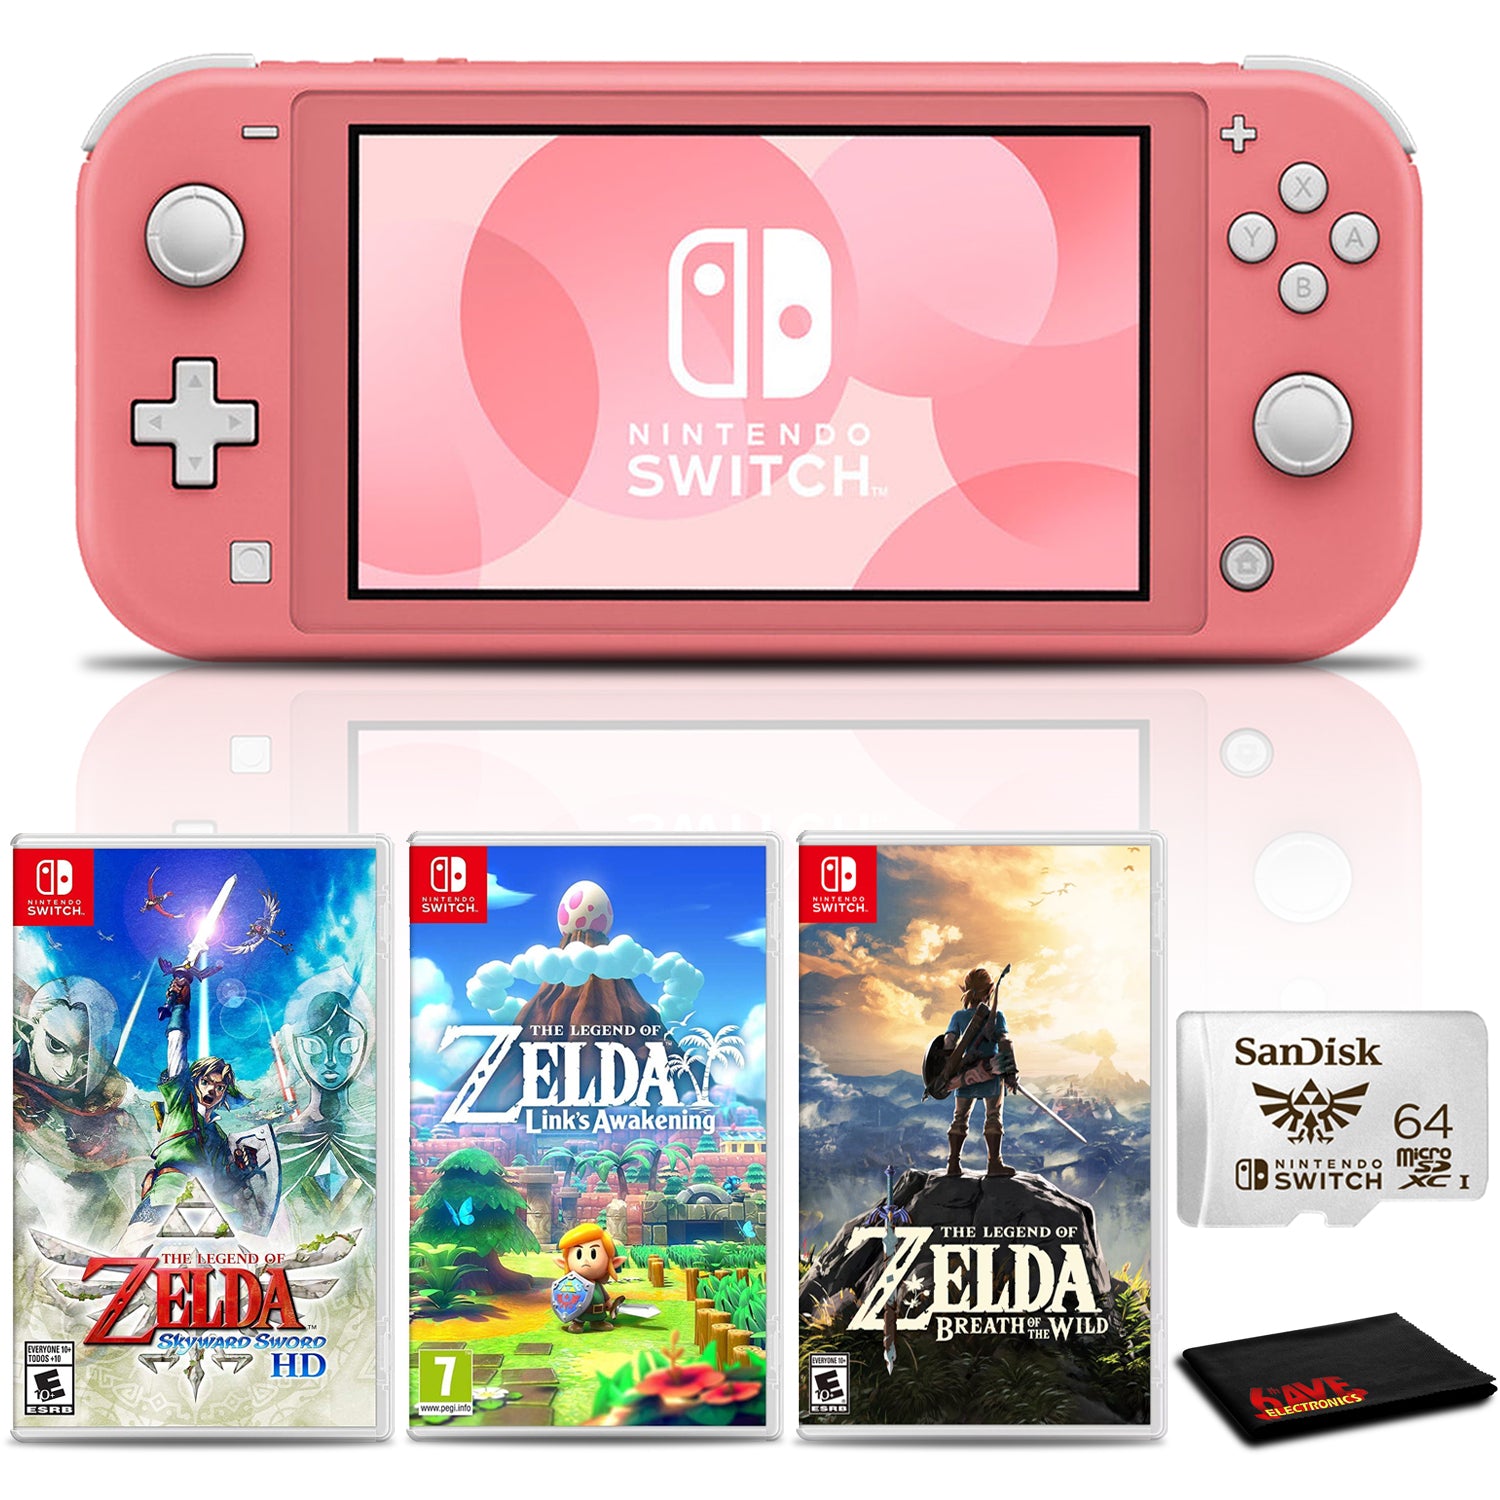 Nintendo Switch Lite Console (Coral) with 64GB microSD and 3-Pk Zelda Games